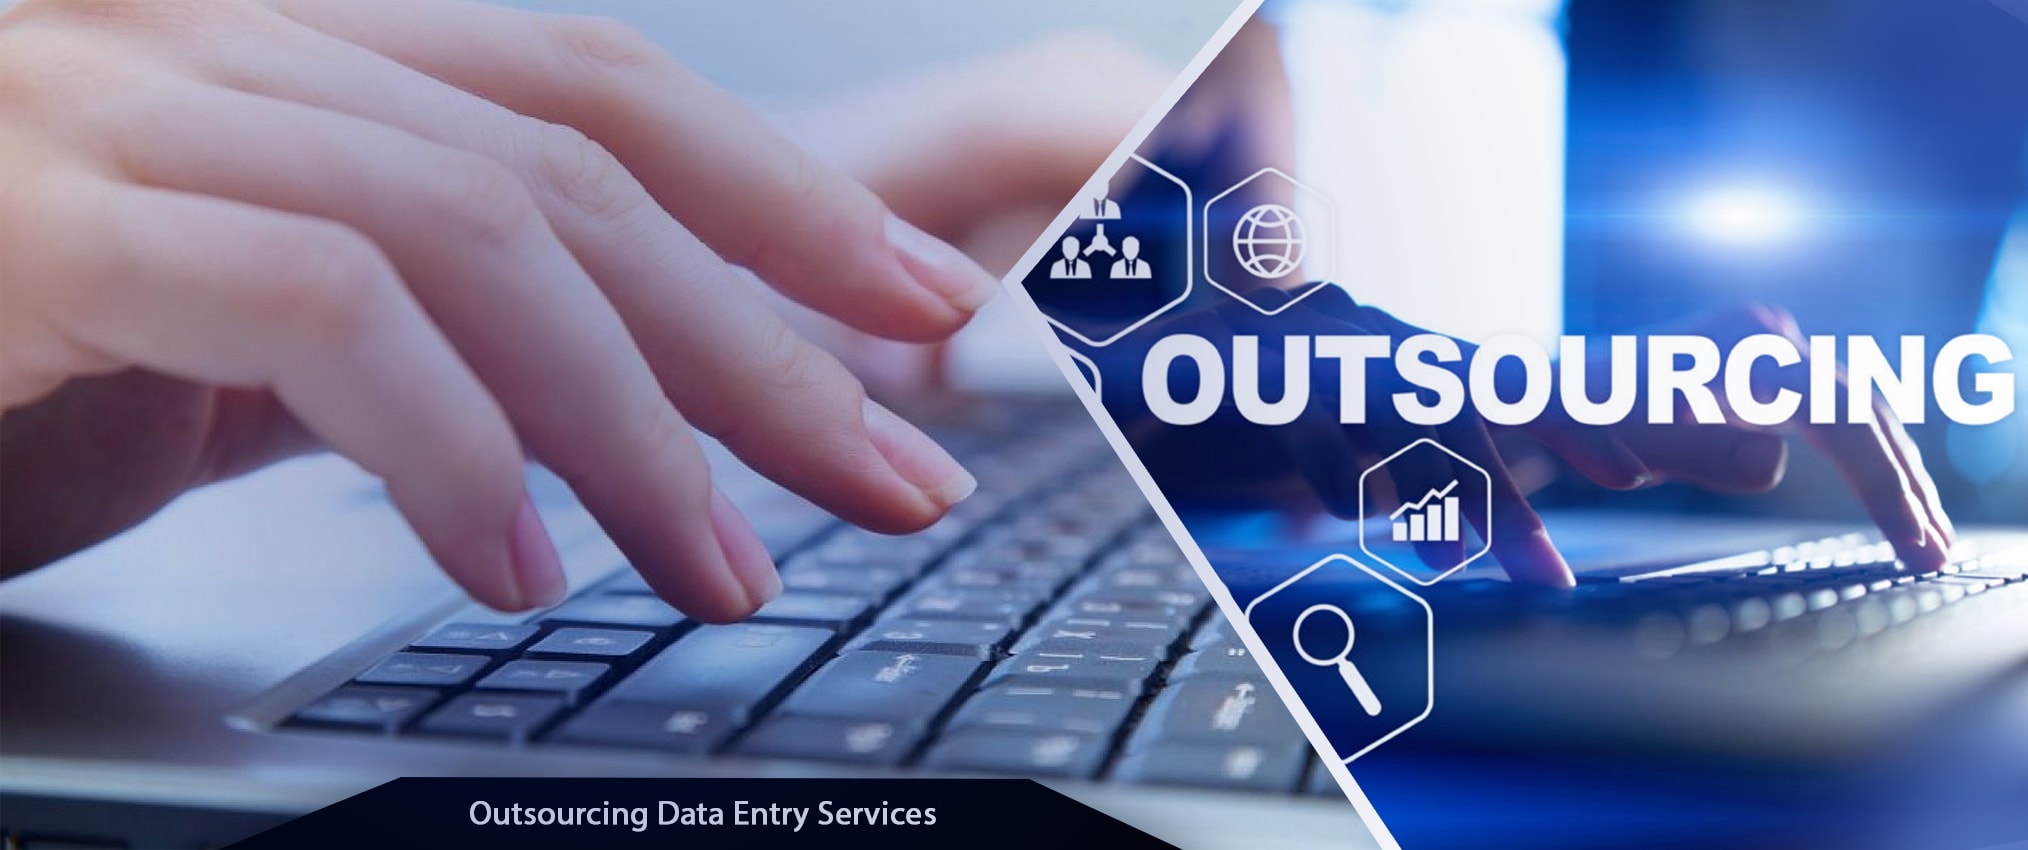 outsourcing data entry b2b business